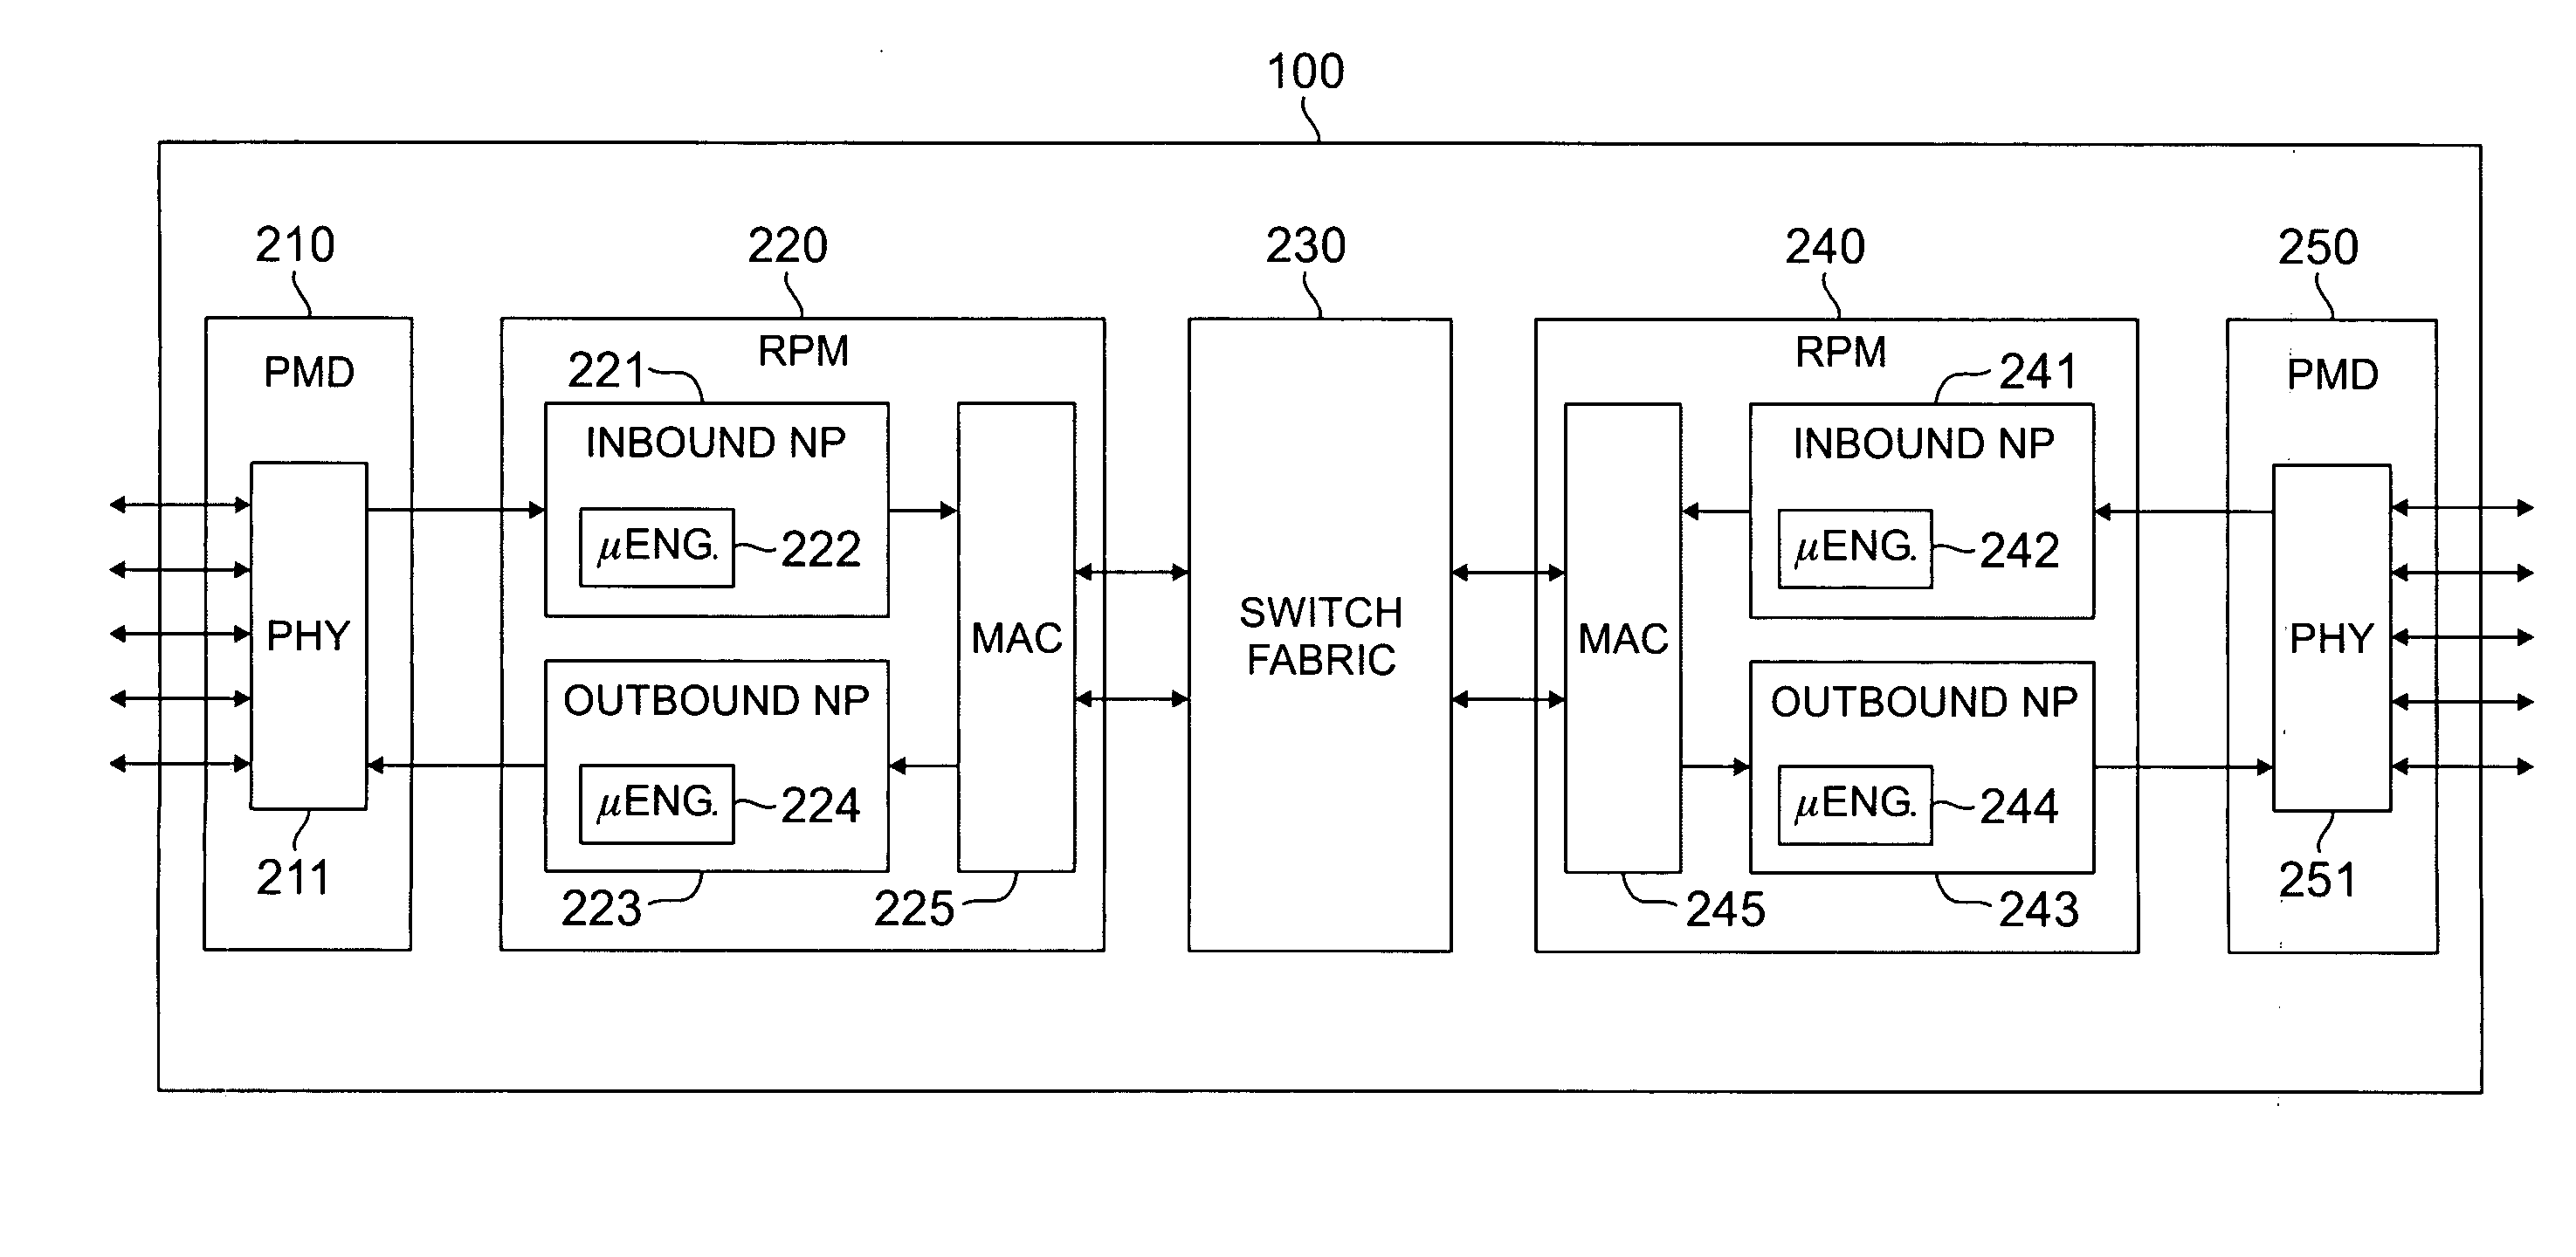 Apparatus and method for distributing forwarding table lookup operations among a plurality of microengines in a high-speed routing node